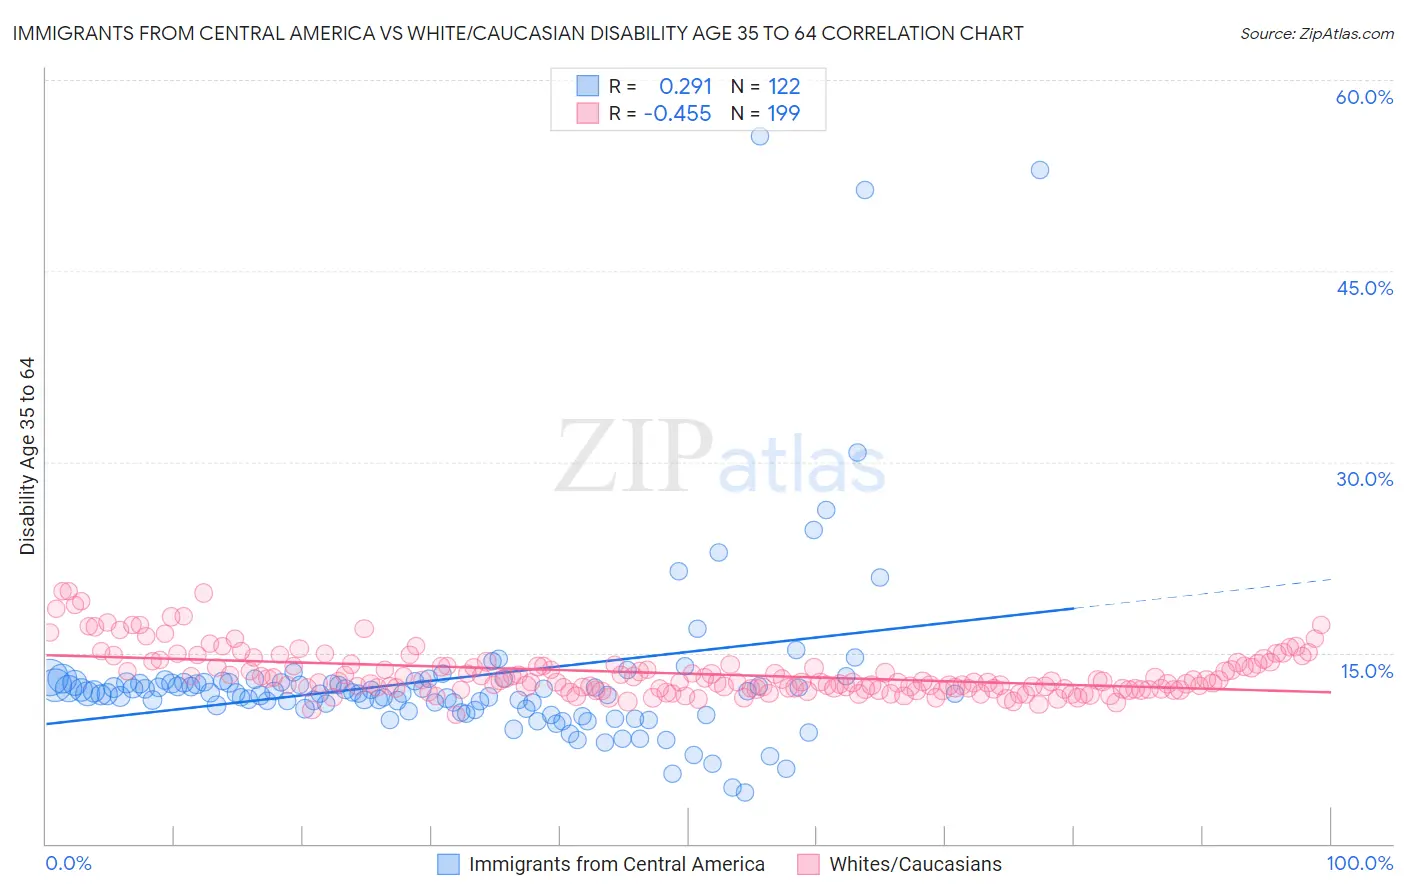 Immigrants from Central America vs White/Caucasian Disability Age 35 to 64